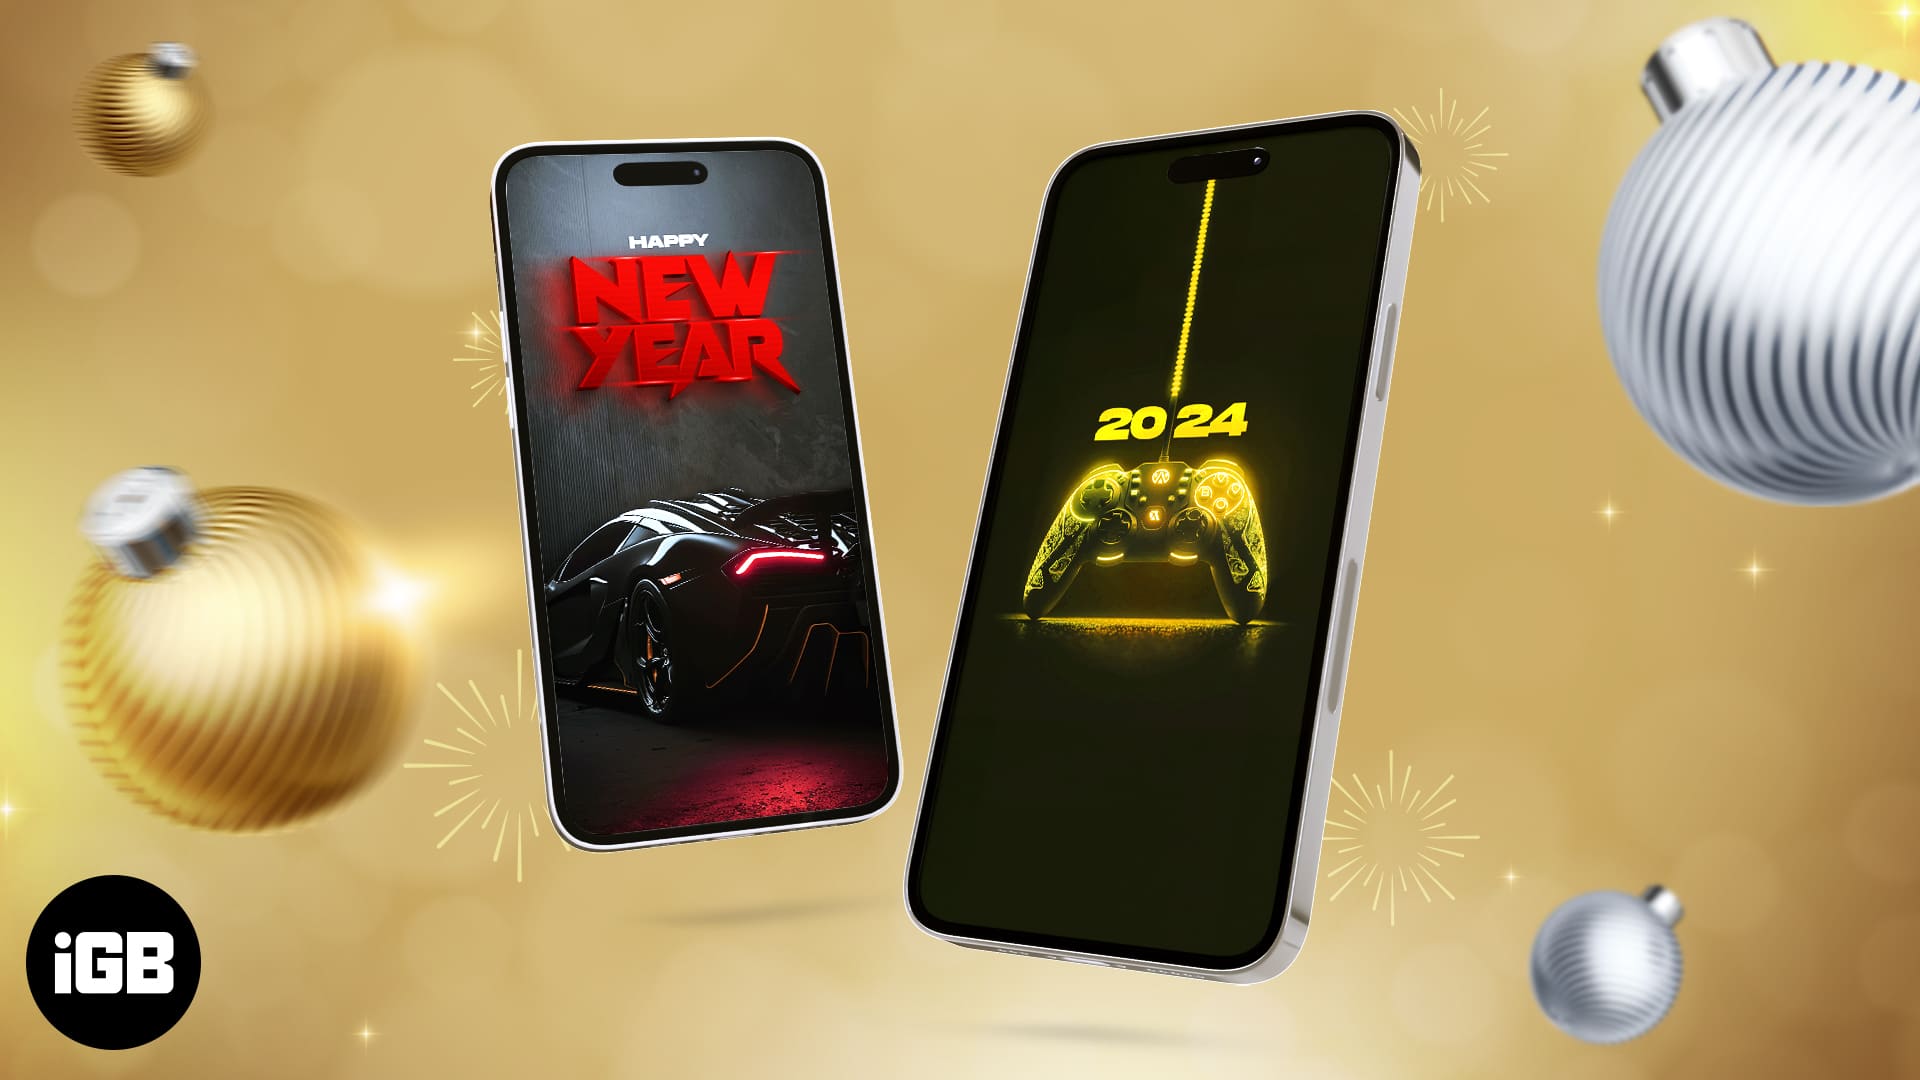 15 Best Happy New Year 2024 wallpapers for iPhone